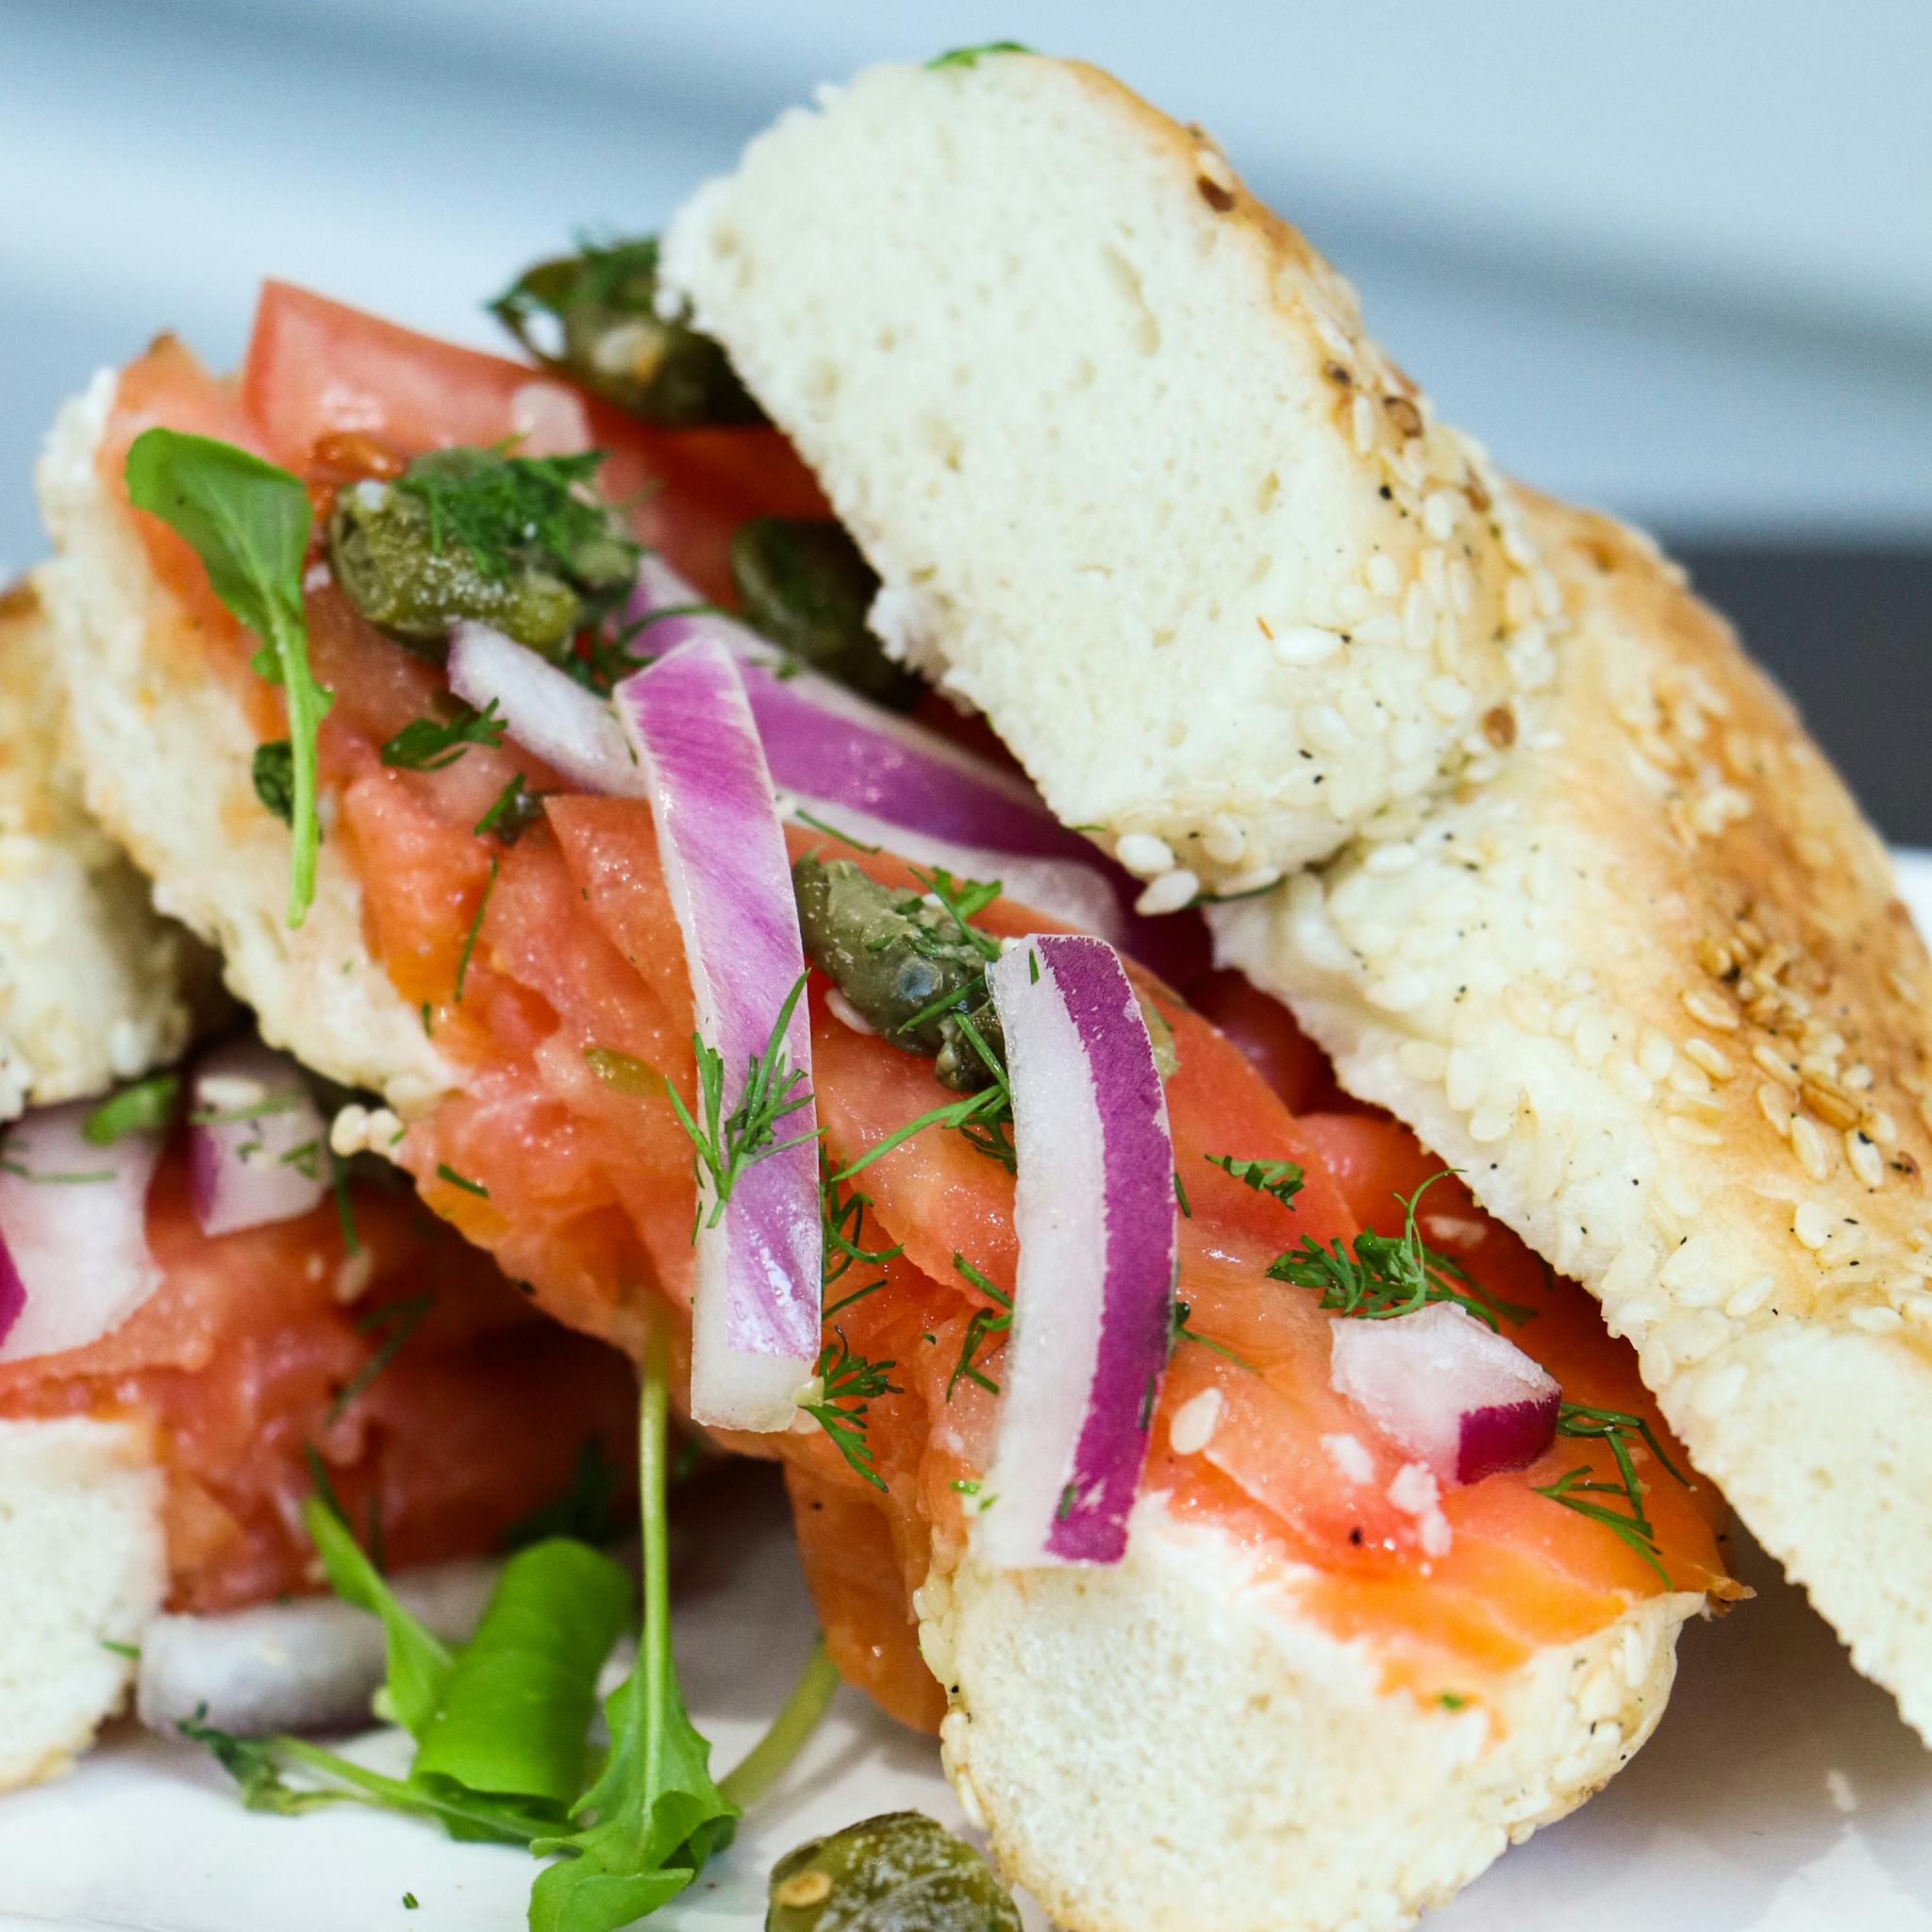 Lox sandwich from Tommy Cafe